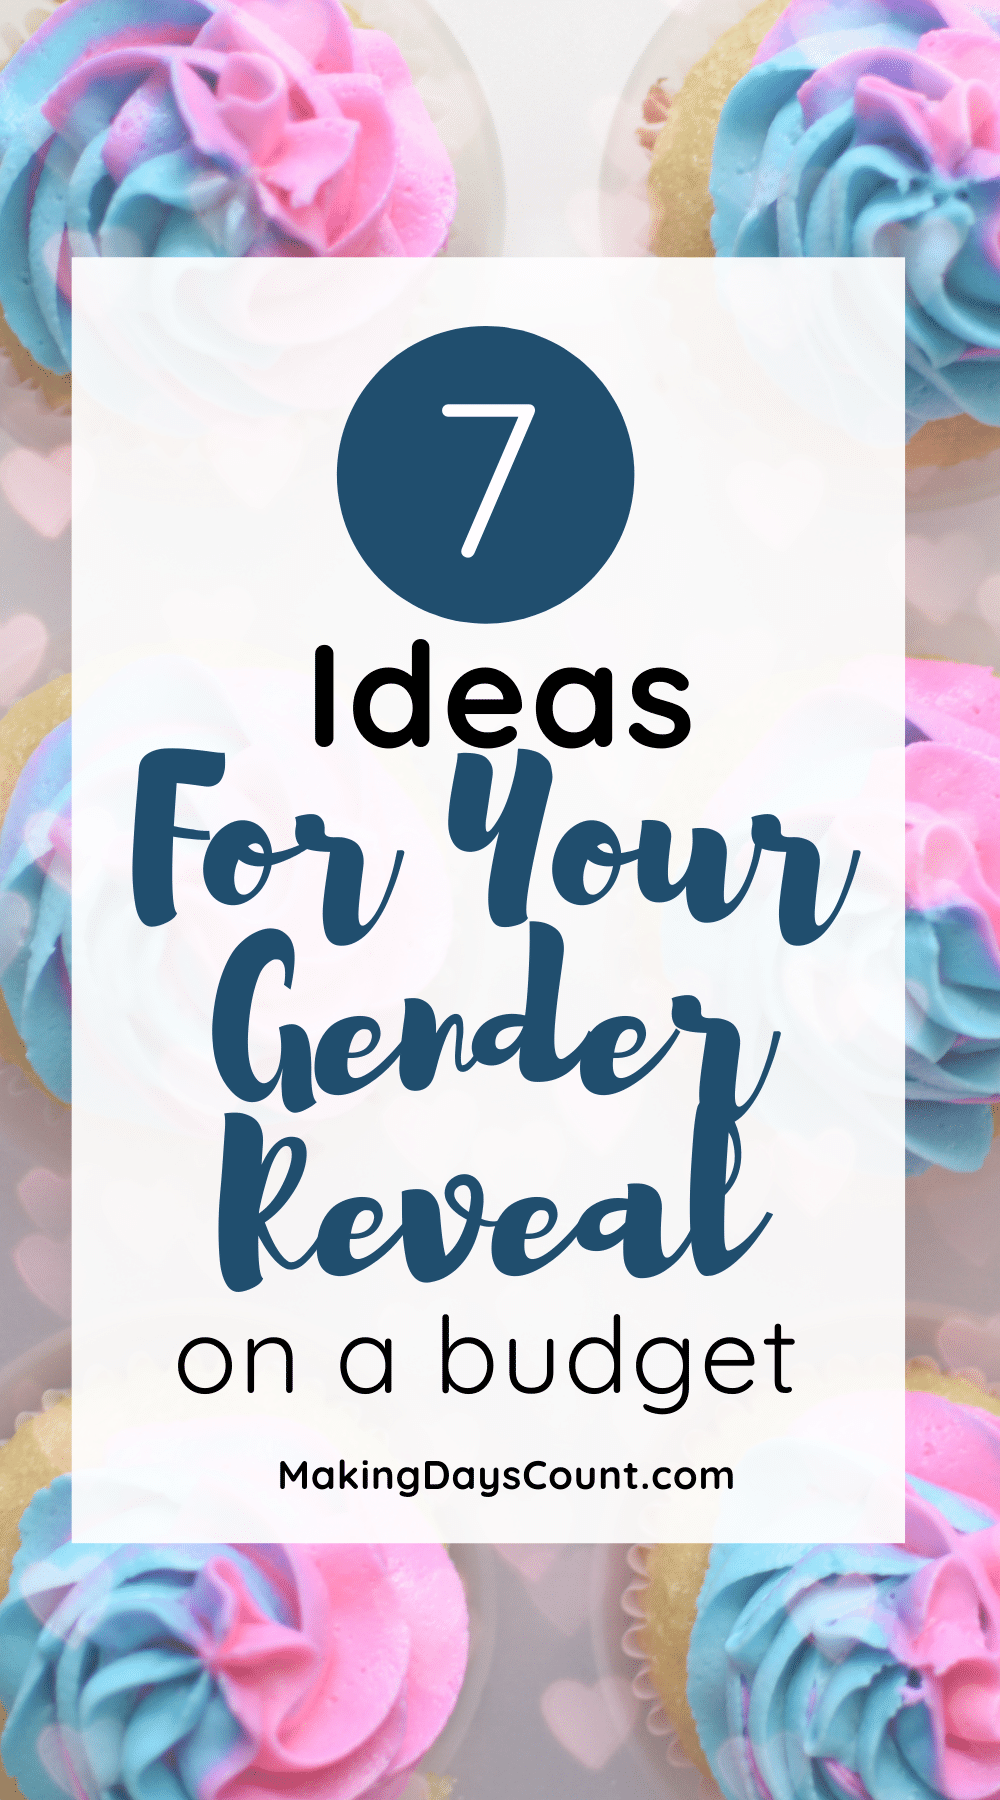 7 Gender Reveal Ideas On A Budget - Making Days Count